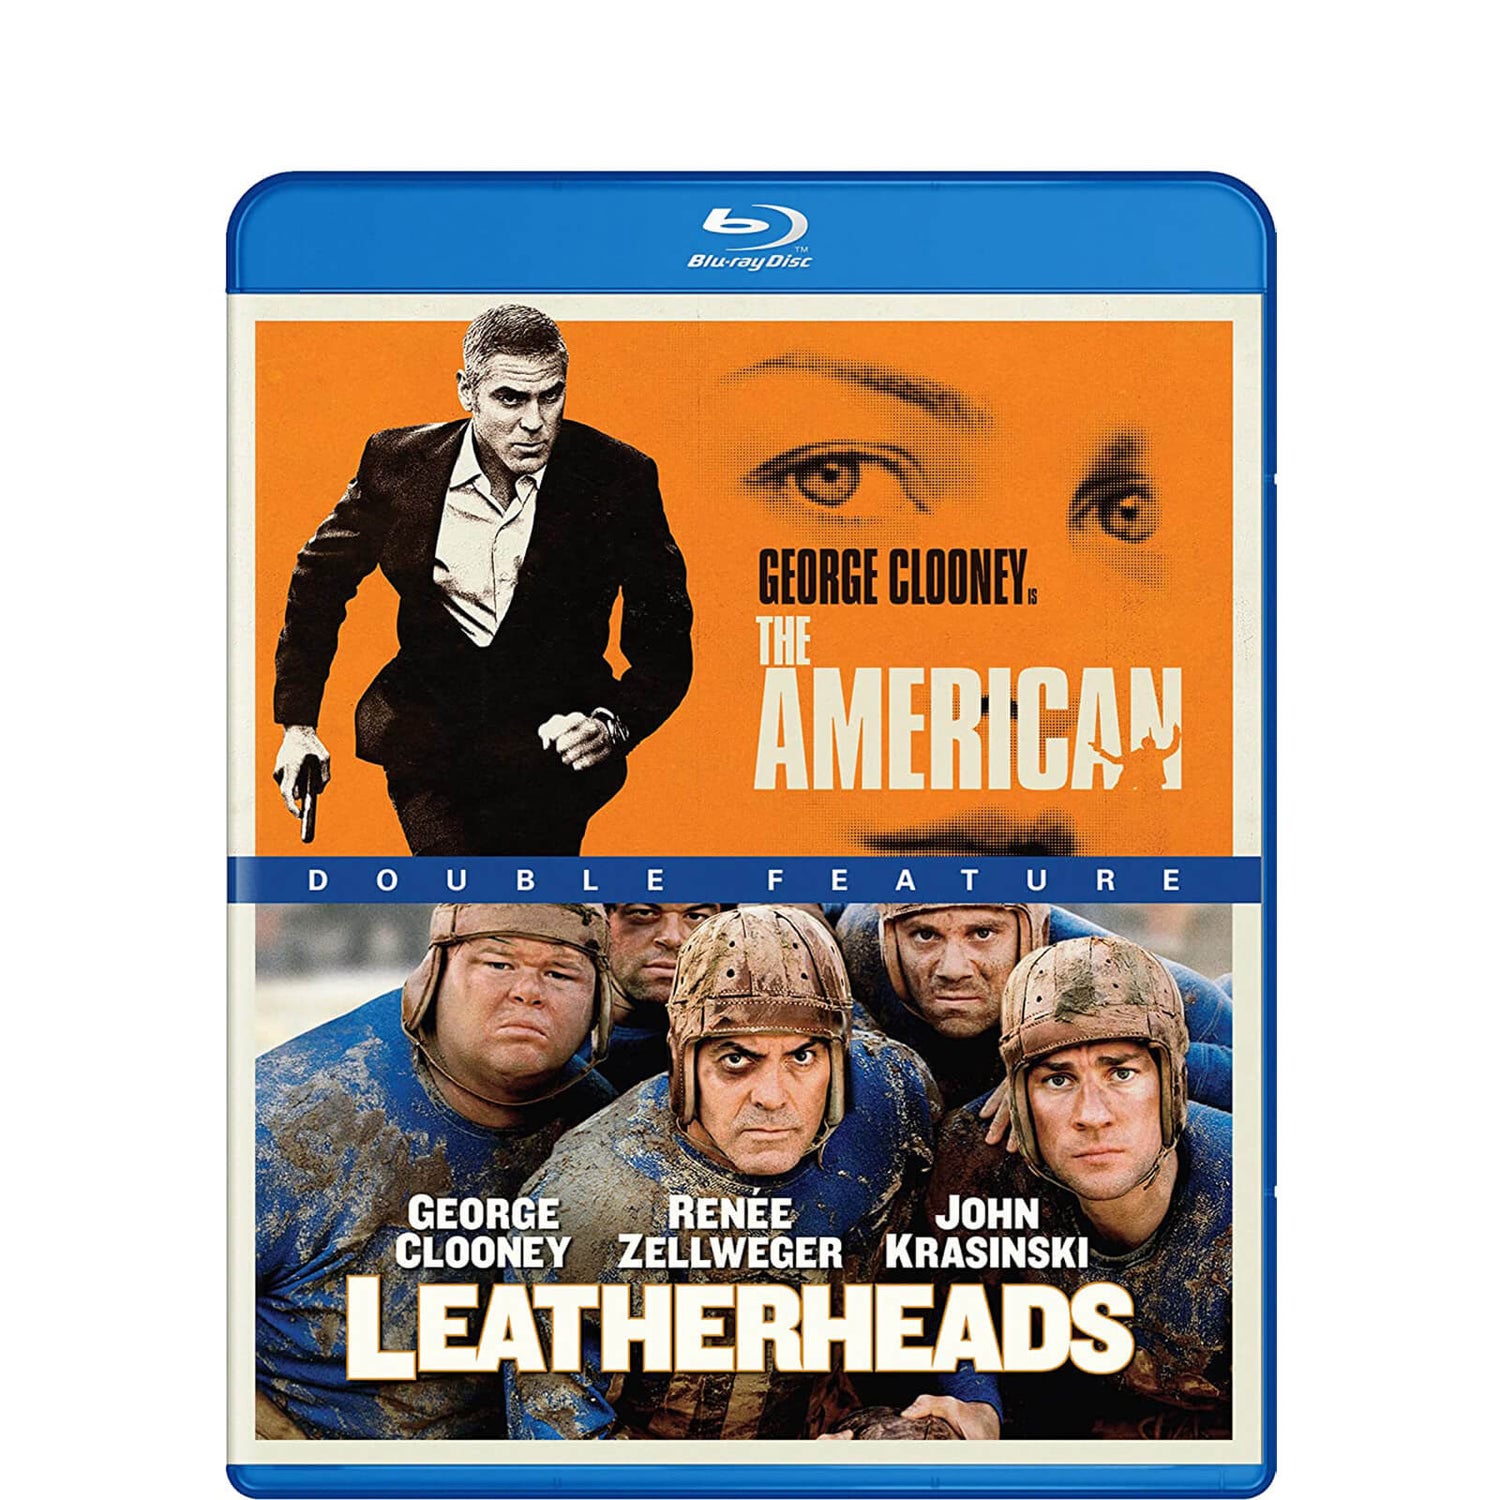 The American / Leatherheads George Clooney Double Feature (US Import)